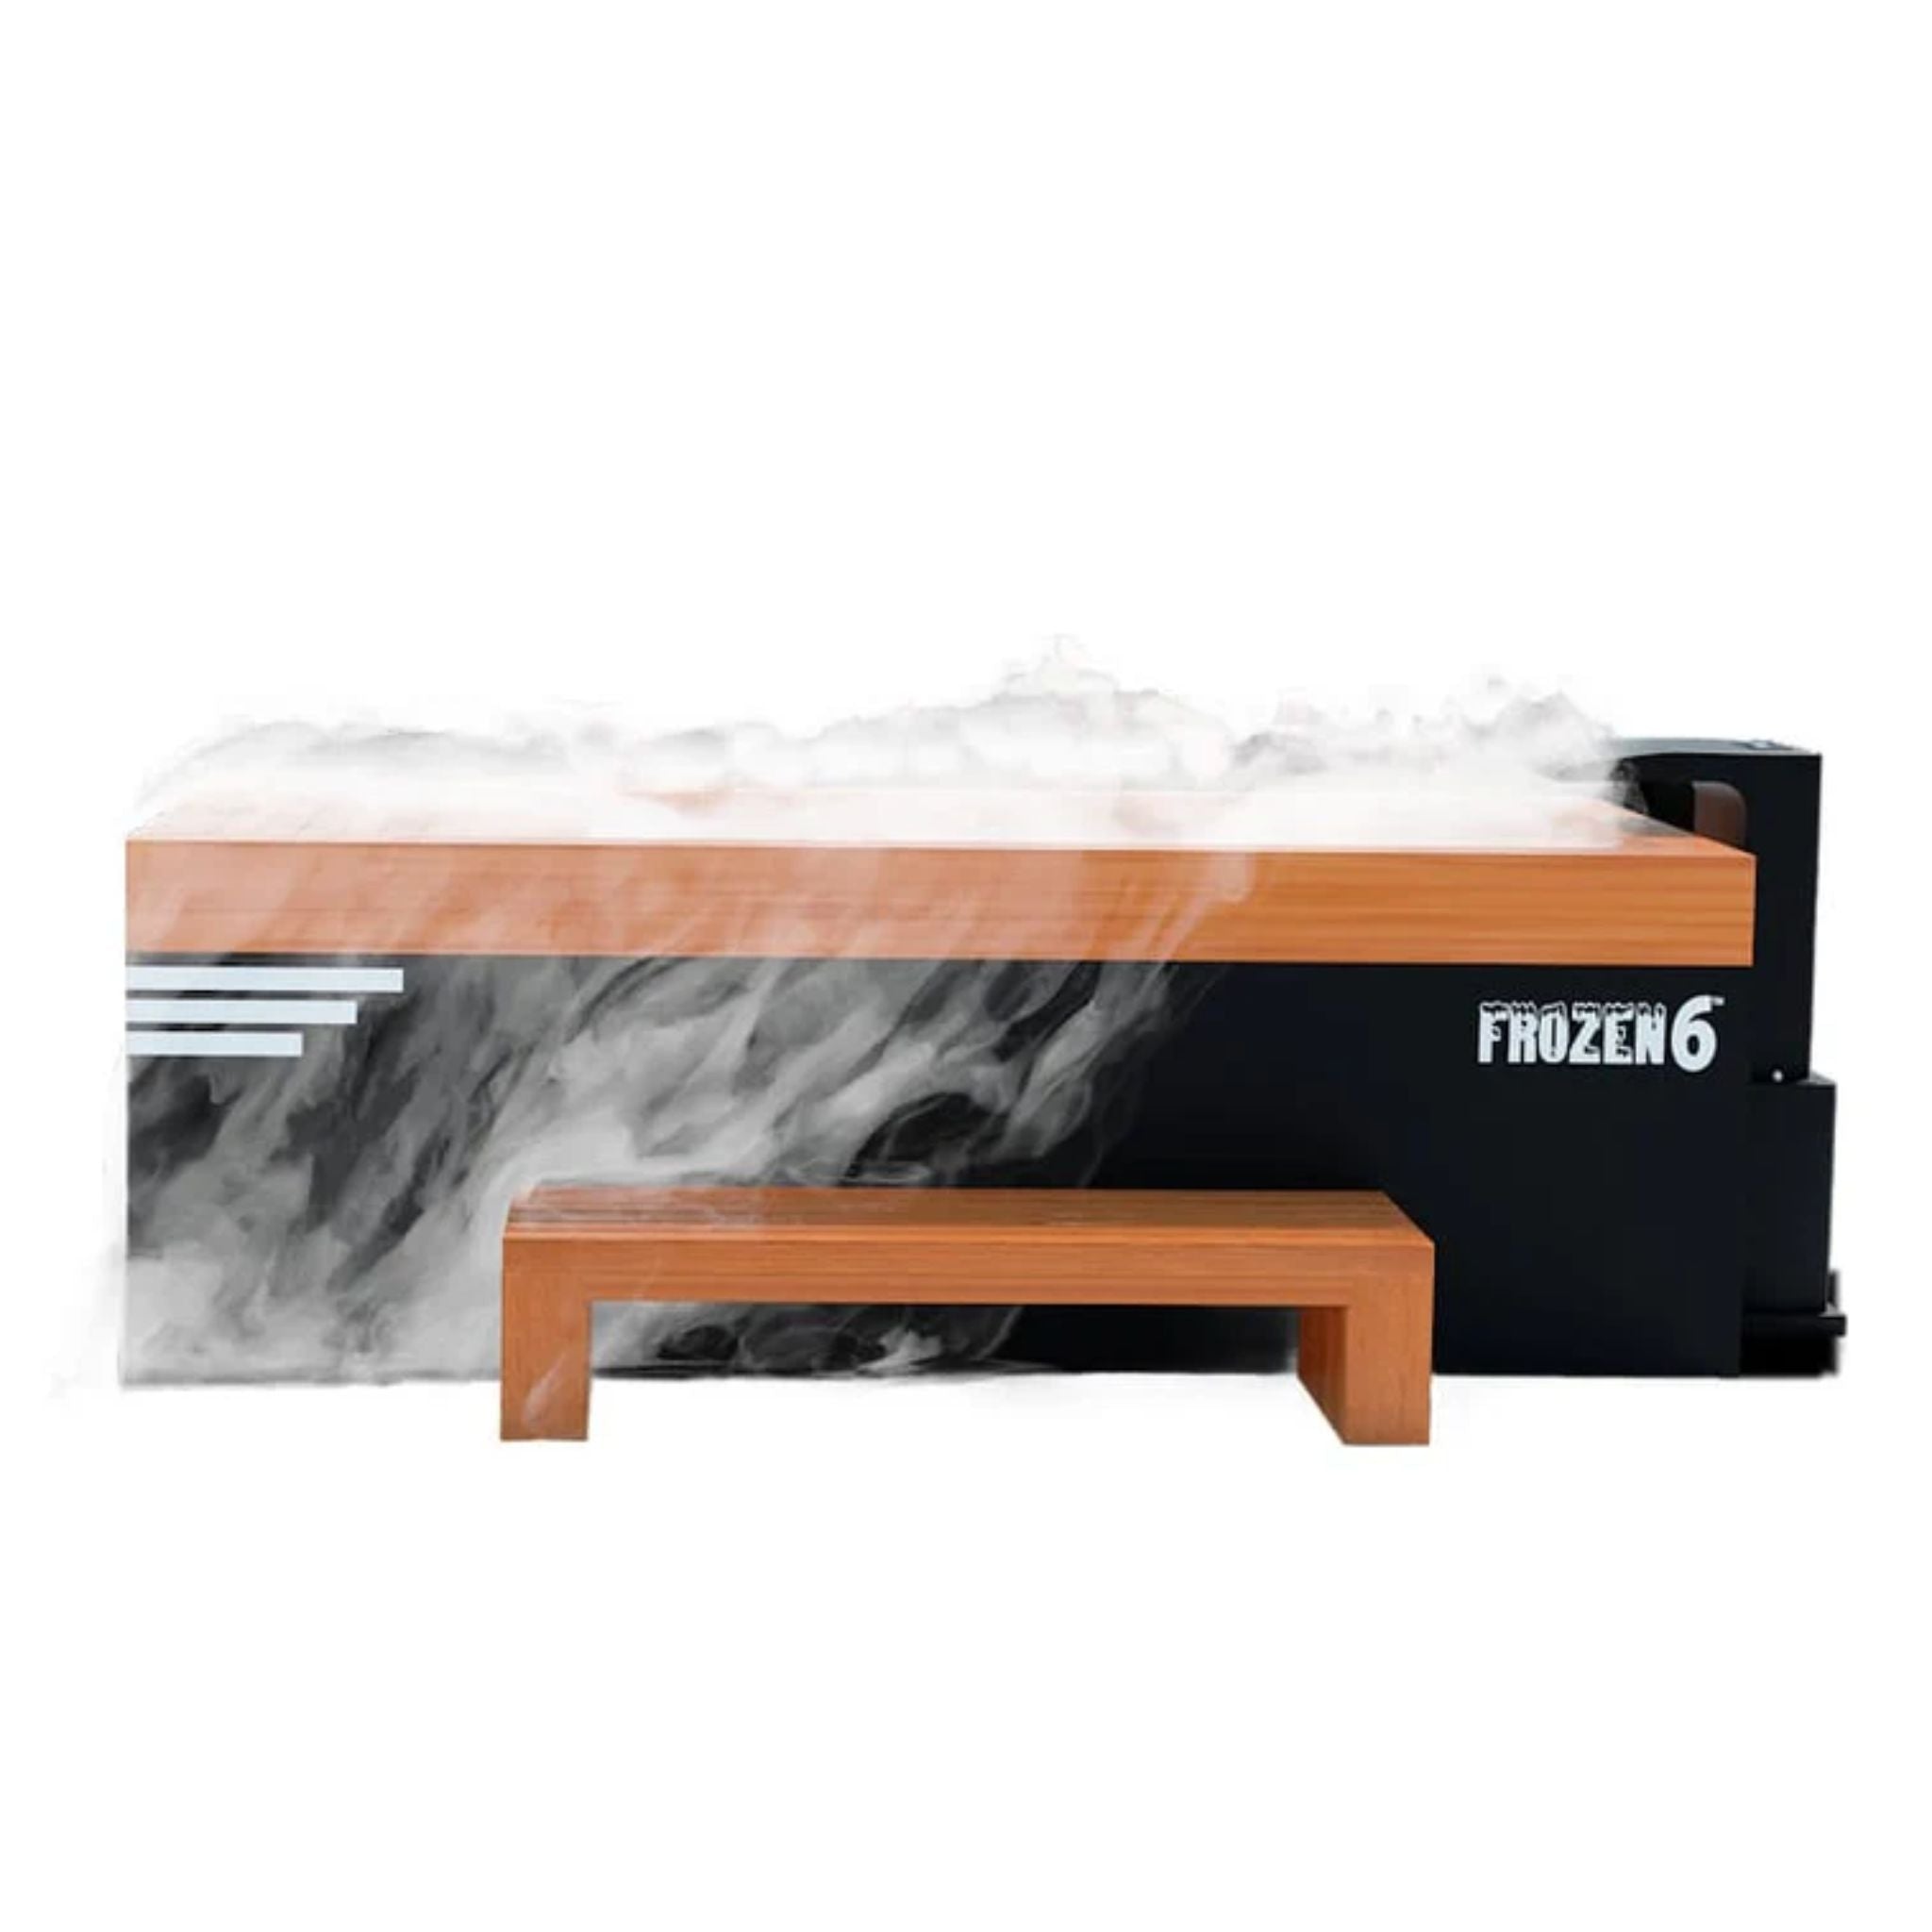 Medical Saunas Frozen Cold Plunge With Accessories Kit And Essential Oil Steam Generator